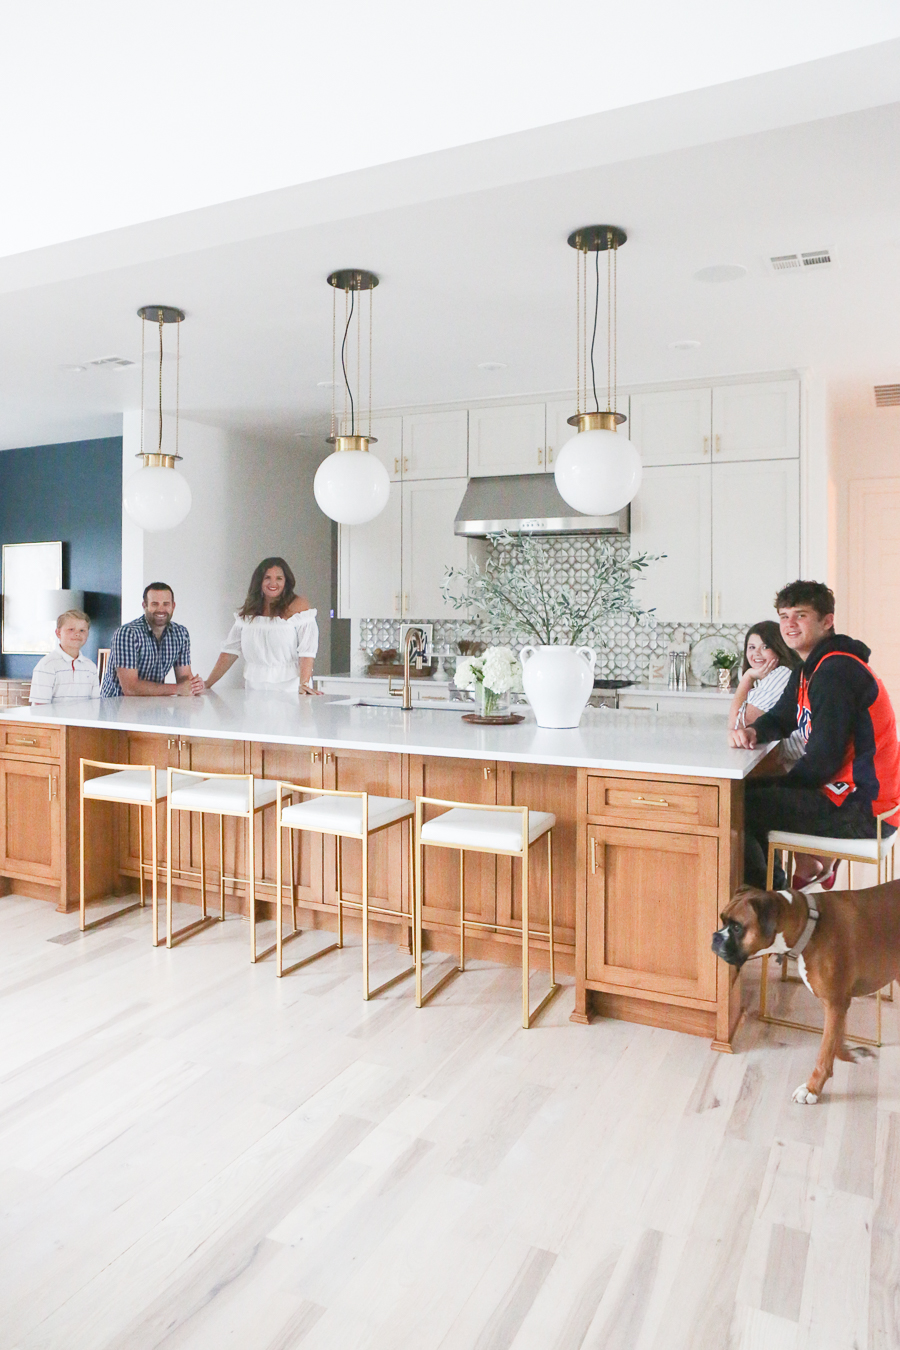 CC and MIke Kitchen Remodel Reveal large natural wood island with quartz countertops and gold bar stools black and gold pendants Ann sacks patterned backsplash gold Brizo faucet large Kallista stainless steel sink open floorpan